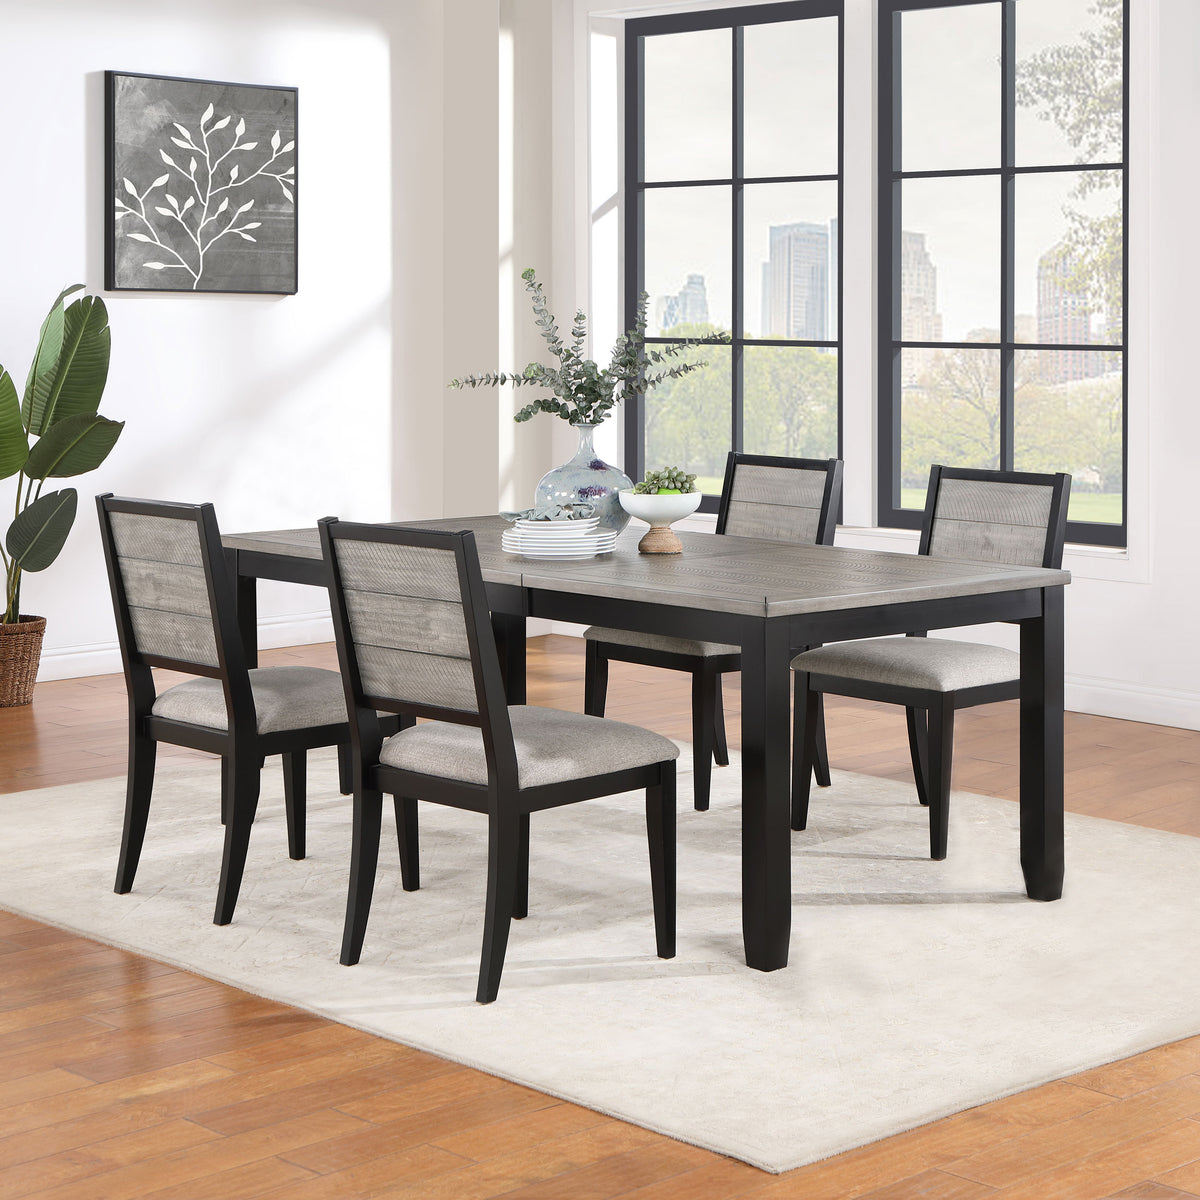 Elodie Dining Table Set with Extension Leaf  Las Vegas Furniture Stores